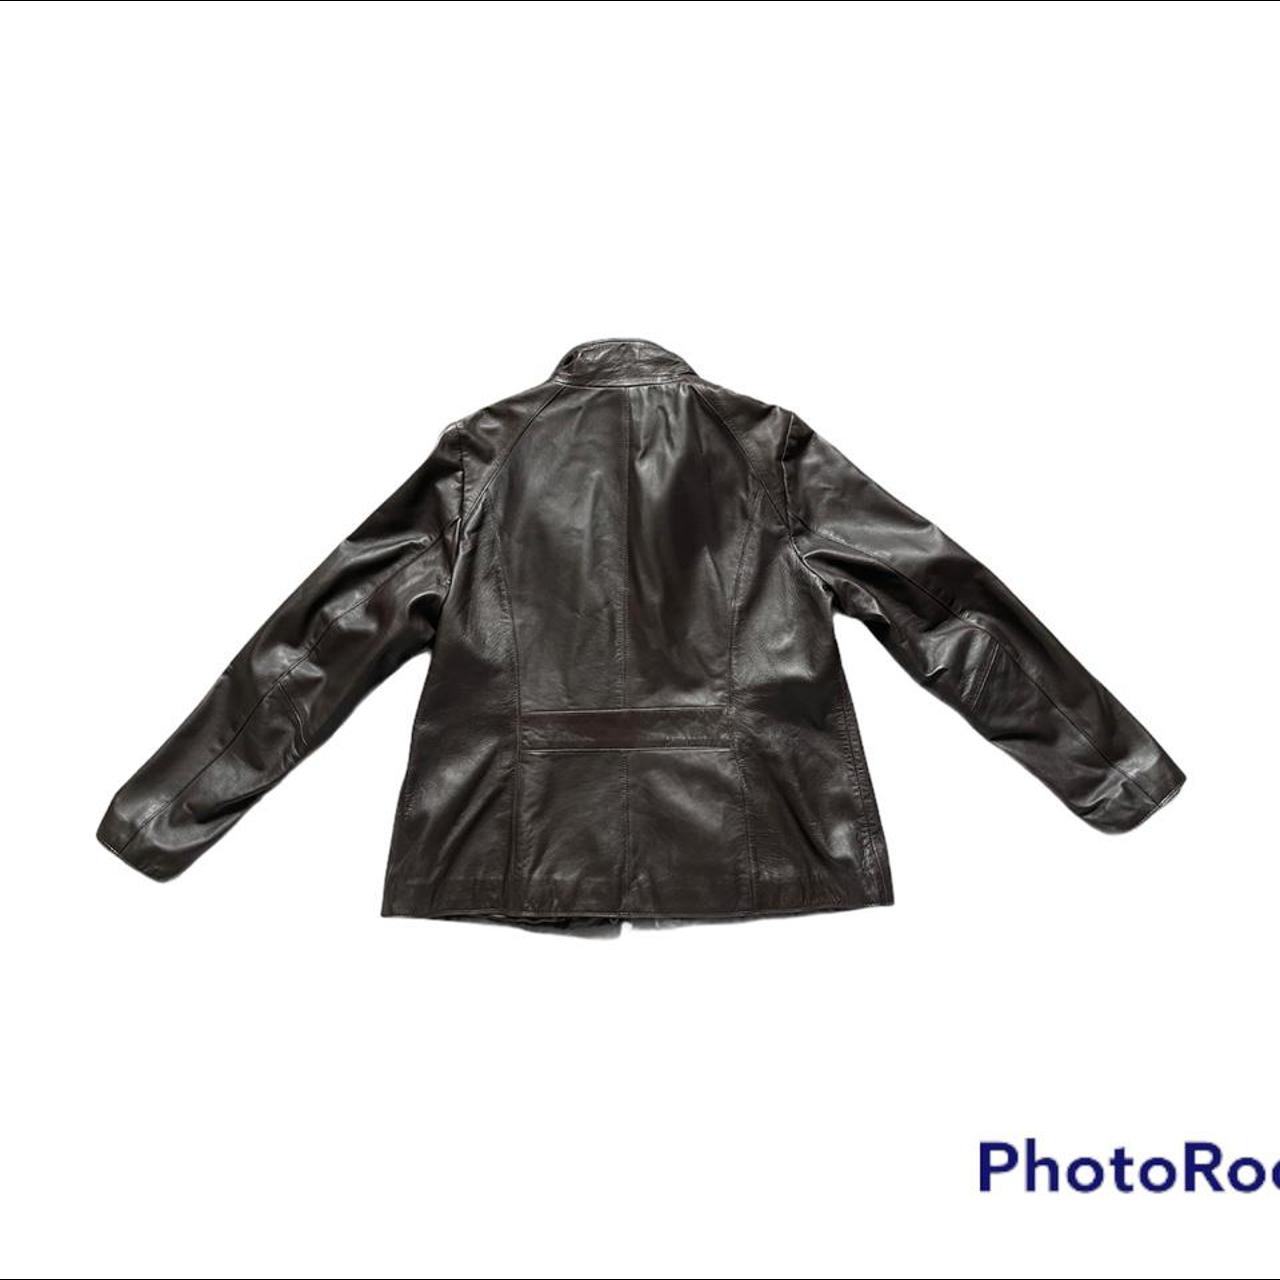 Product Image 2 - John Lewis genuine brown leather